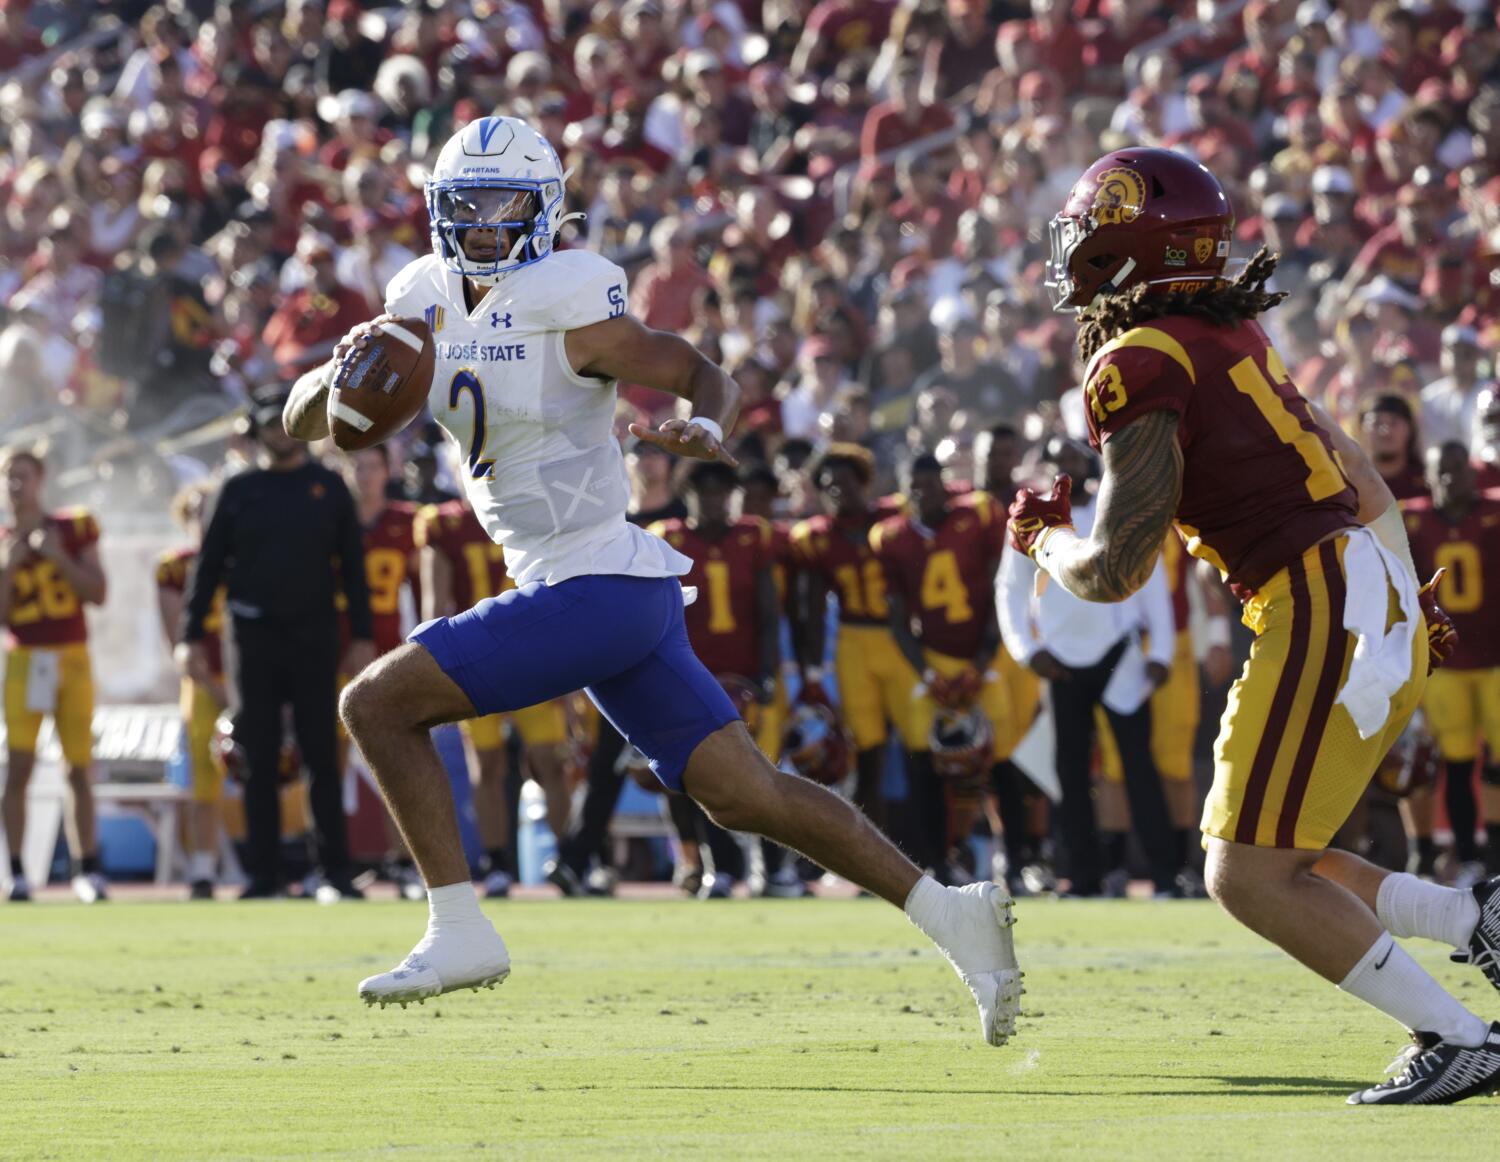 Alex Grinch says USC's defense against San José State 'tilted in the positive direction'